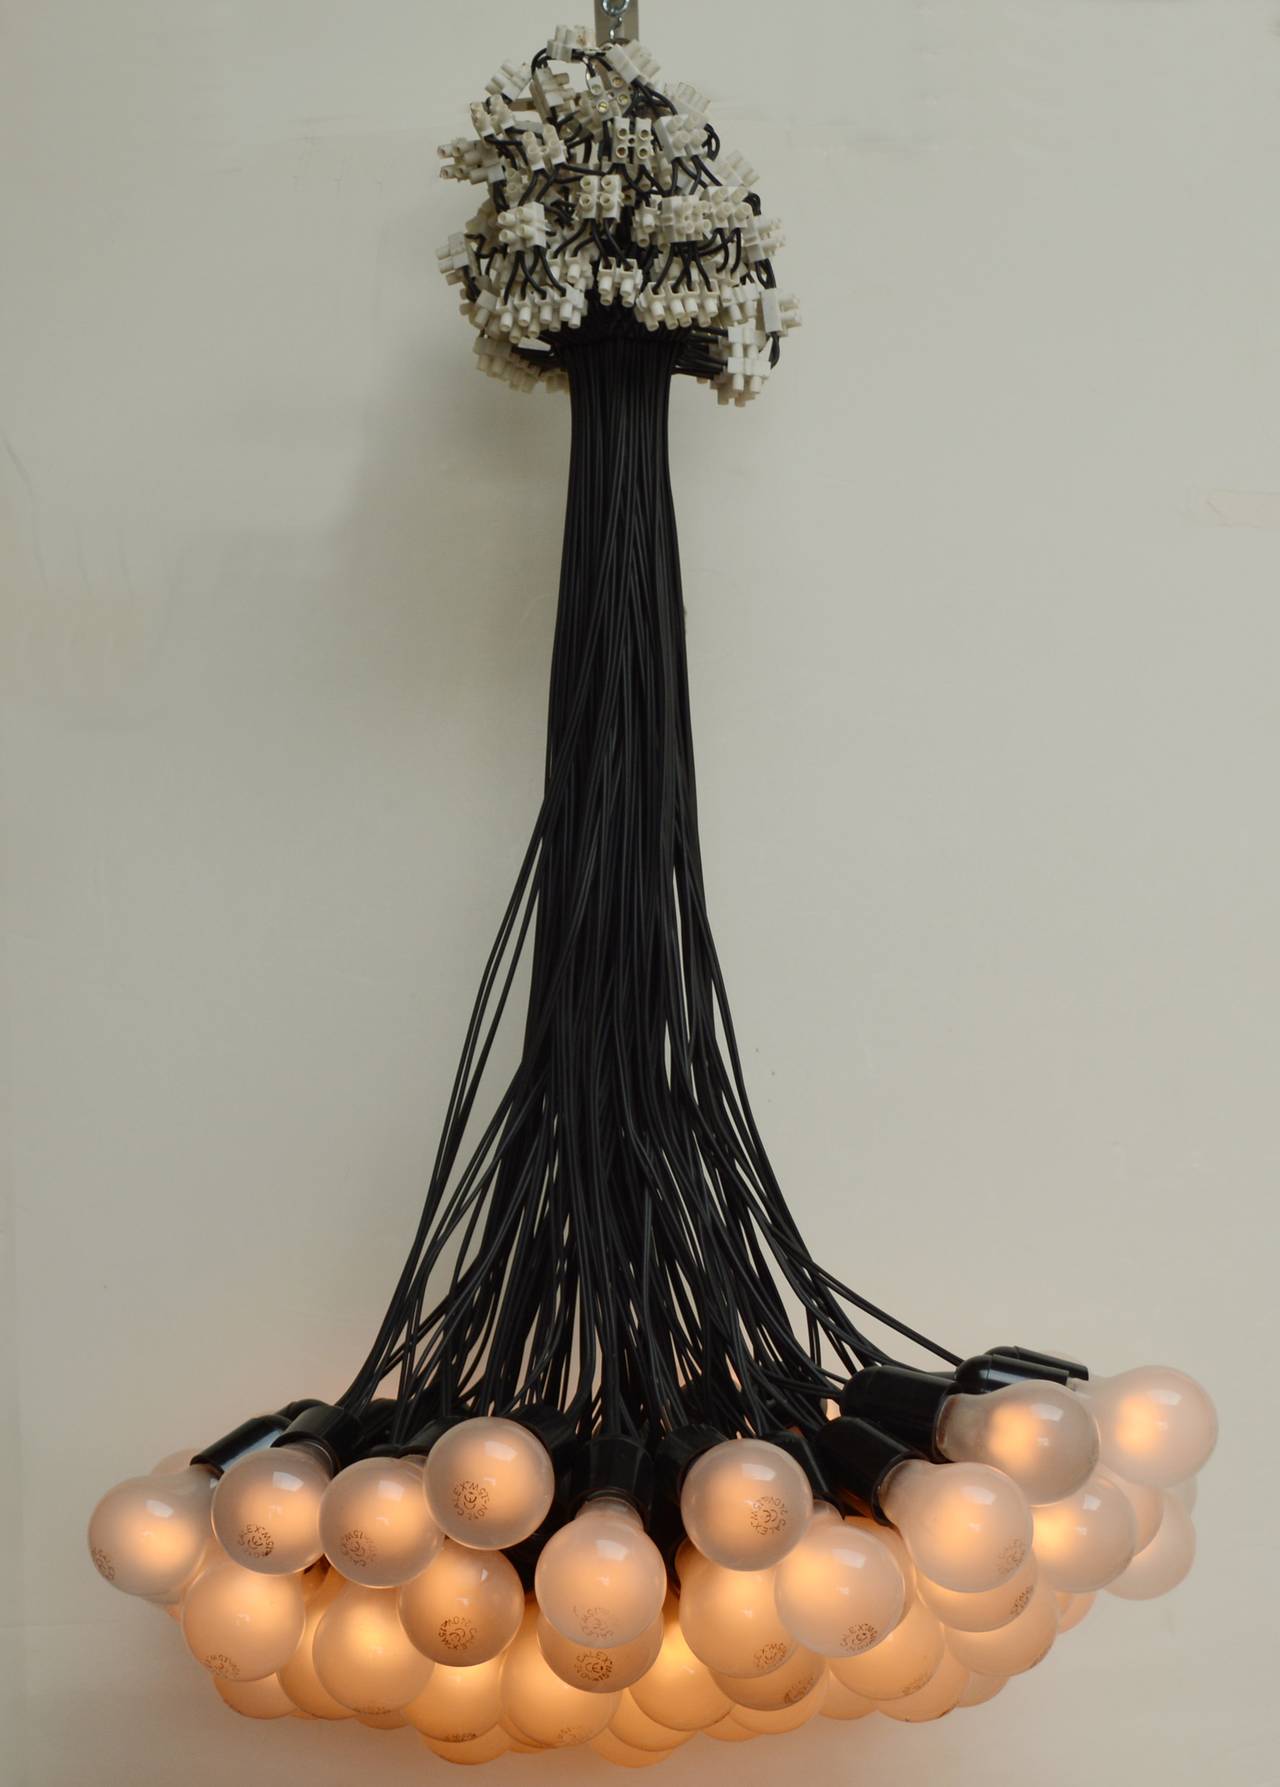 Designed by Rody Graumans in 1993 this chandelier uses only what is necessary to create light, bulbs, wire and connectors. Missing one bulb at the time of listing.